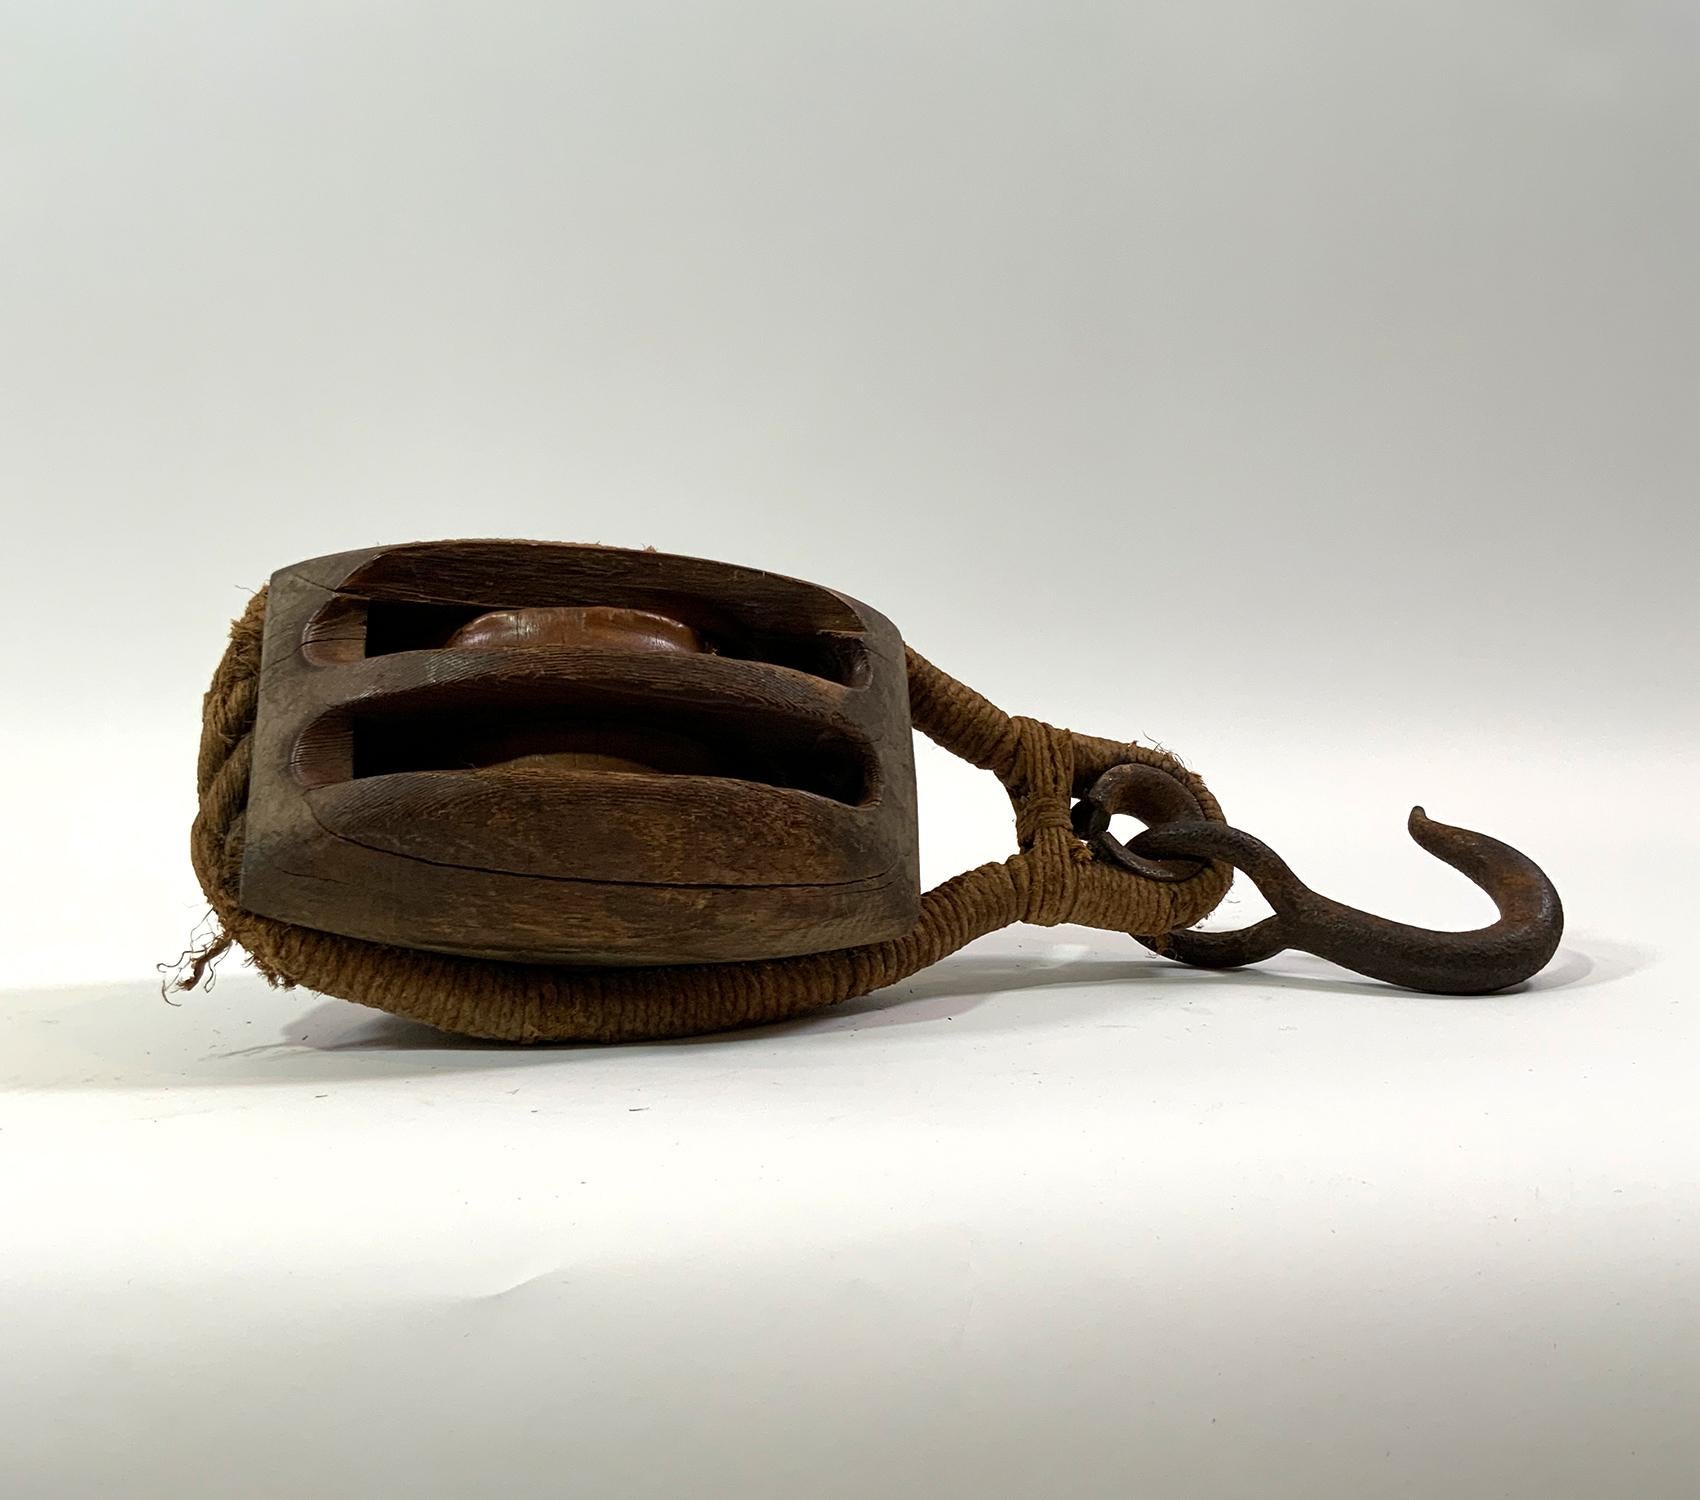 Nineteenth Century wood ships pulley block from a sailing ship, with wood pulleys and rope wrapped hoisting hook. Quality relic. Look at rope work.

Weight: 10 LBS
Overall Dimensions: 16” H x 8” L x 7” D
Made: America
Material: Wood
Date: